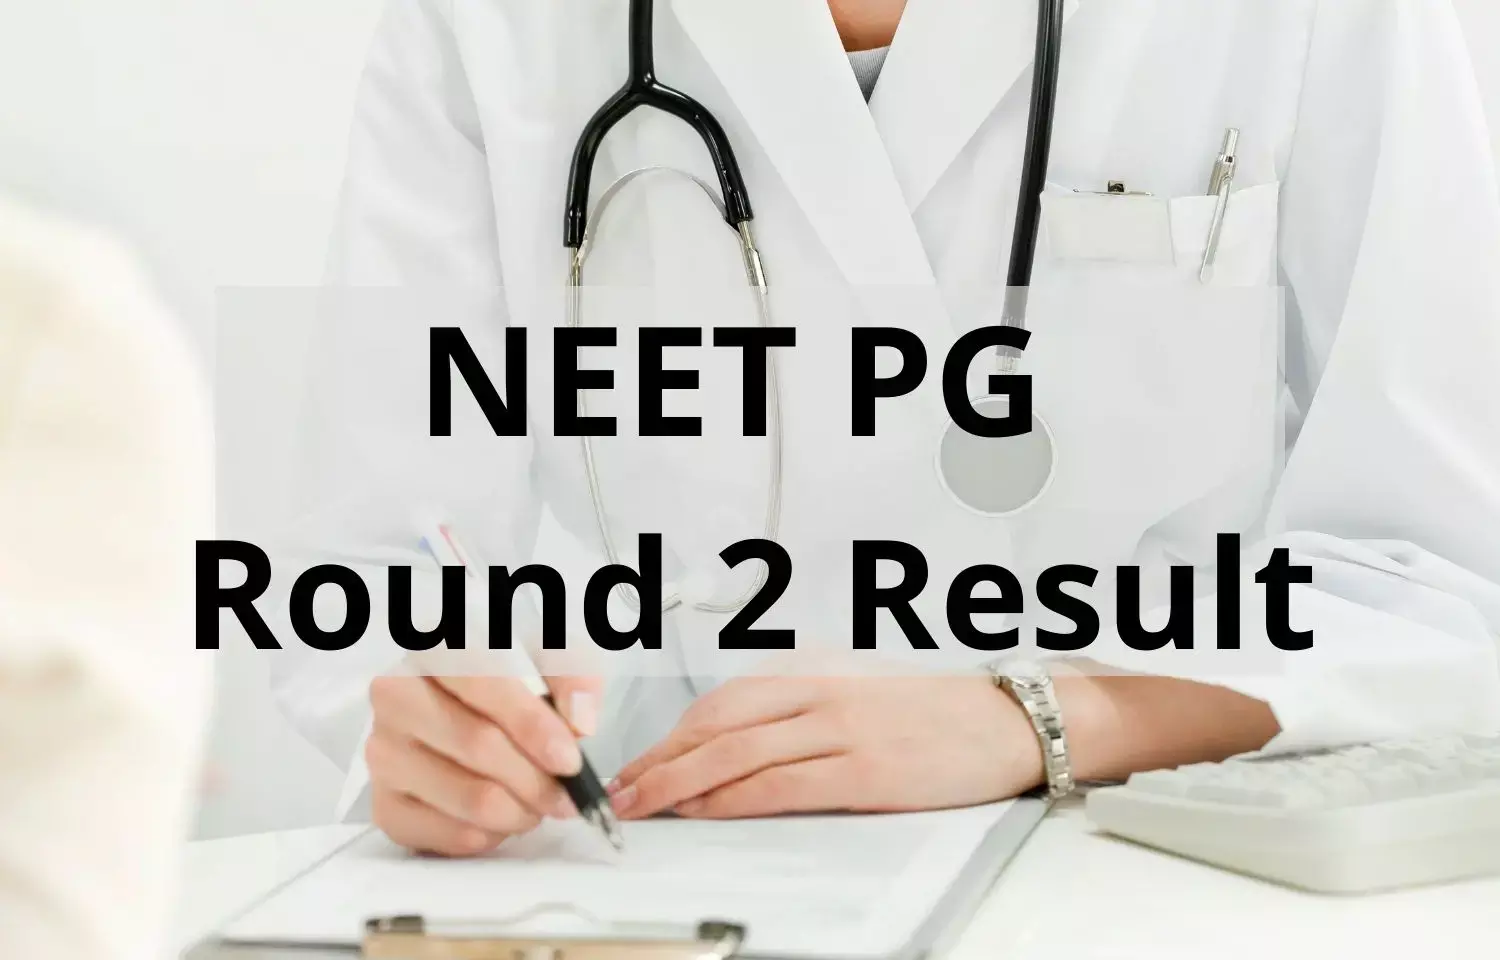 MCC Releases Final Result of Round 2 NEET PG Counselling 2021, Details